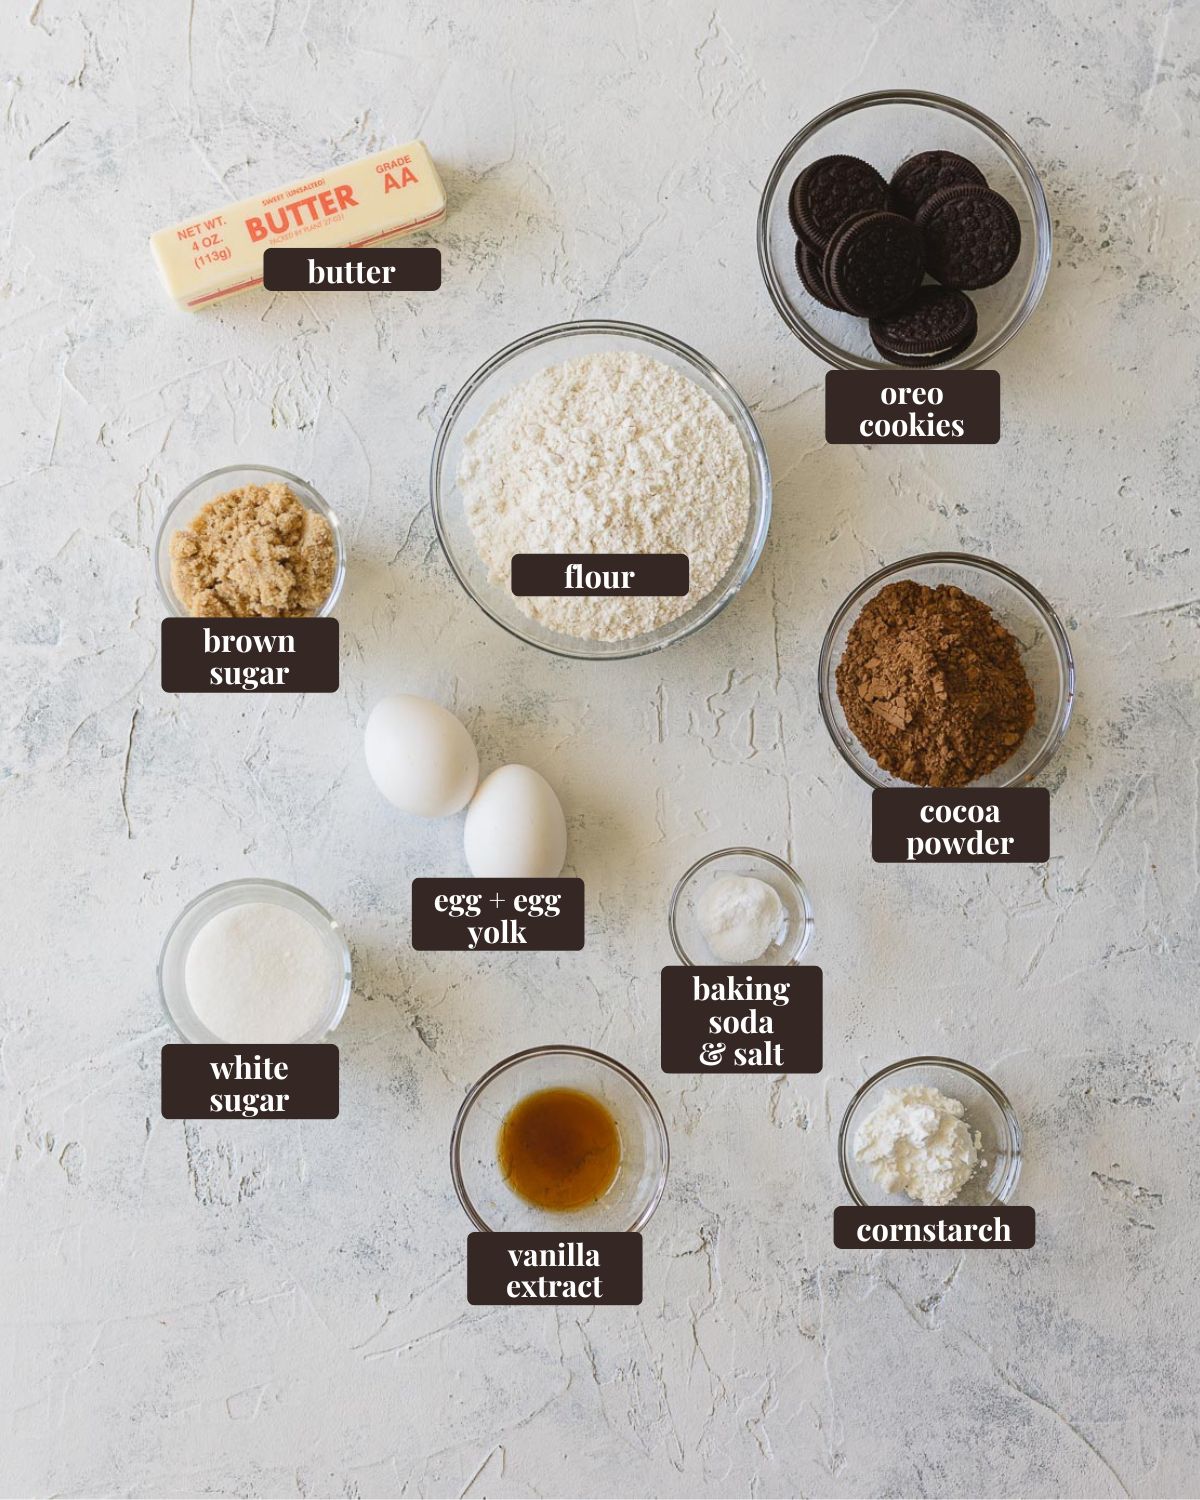 Labeled ingredients for French Silk Pie Cookies: butter, oreo cookies, cocoa powder, cornstarch, vanilla extract, white sugar, brown sugar, butter, flour, baking soda & salt, and egg + egg yolk.